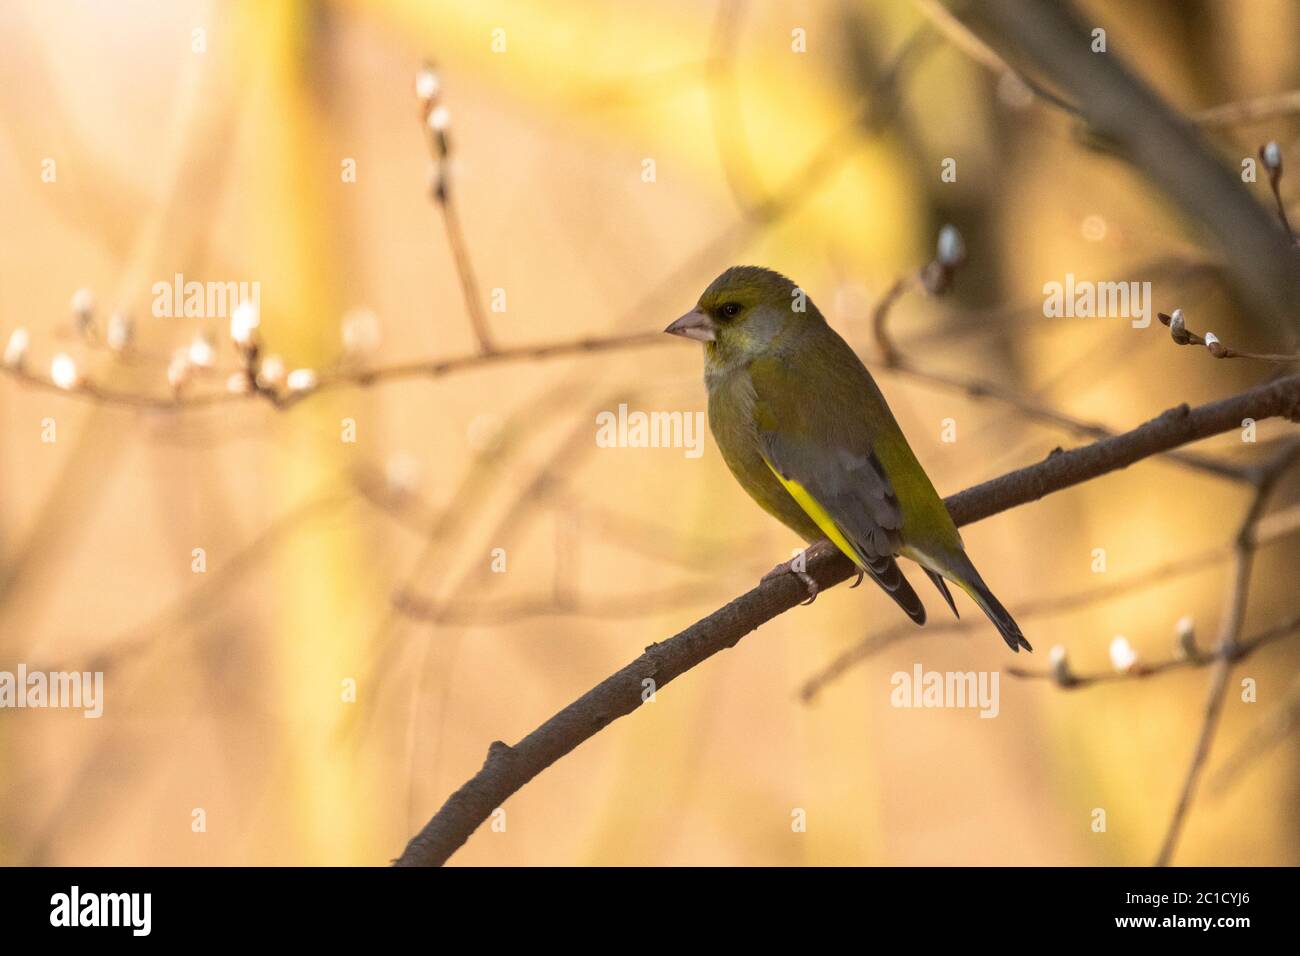 Single adult greenfinch (Carduelis chloris) perched on a branch in natural woodland surroundings Stock Photo